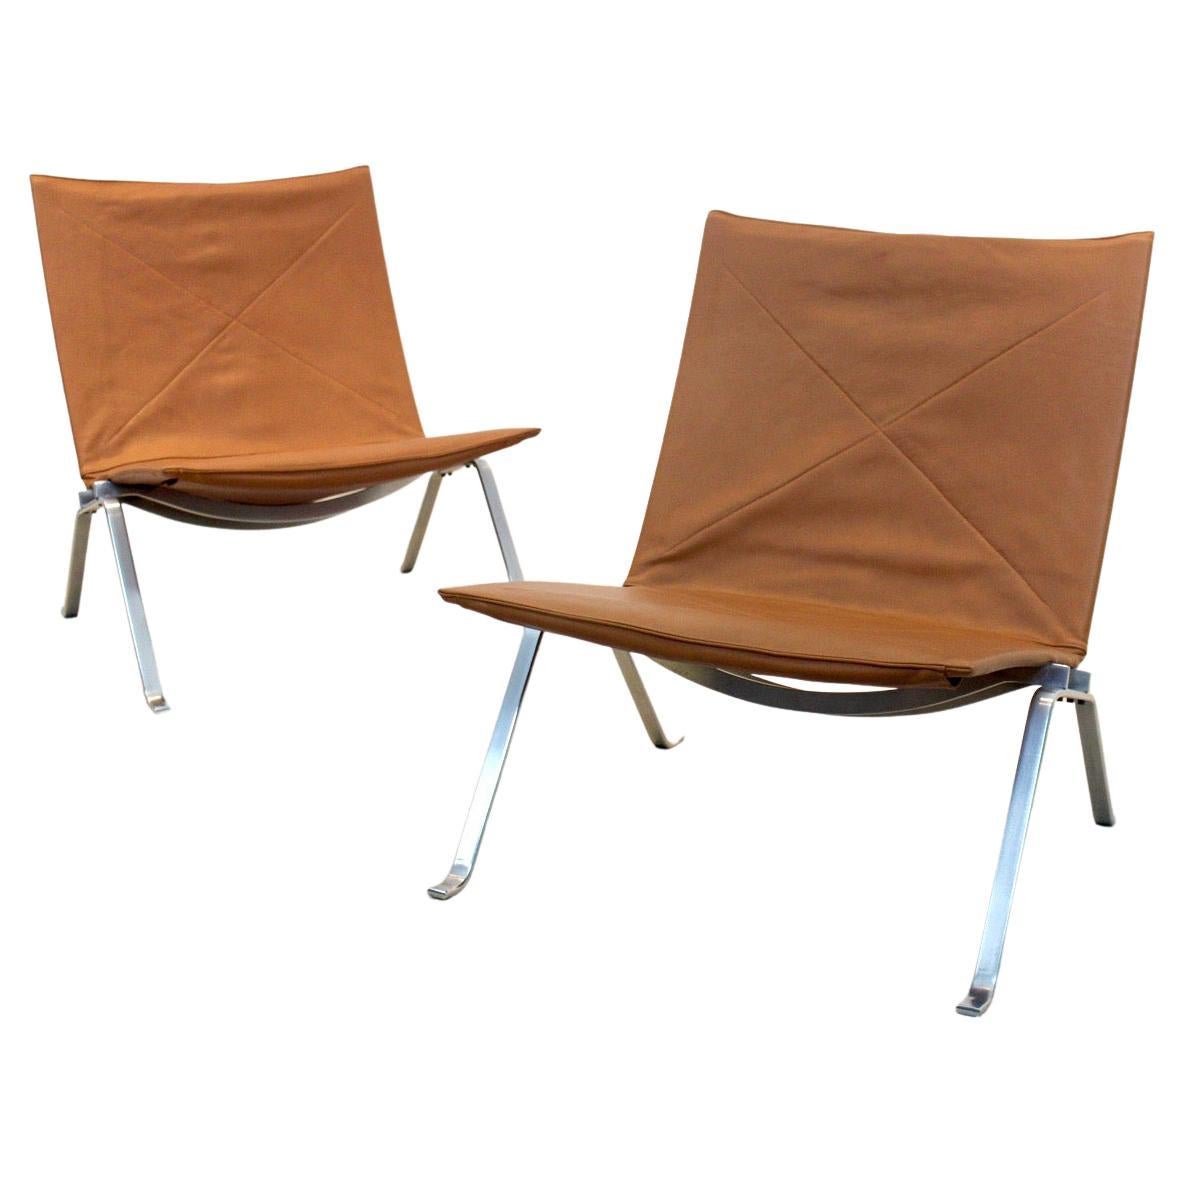 Exquisite Cognac Leather PK22 chairs by Poul Kjærholm for E. Kold Christensen